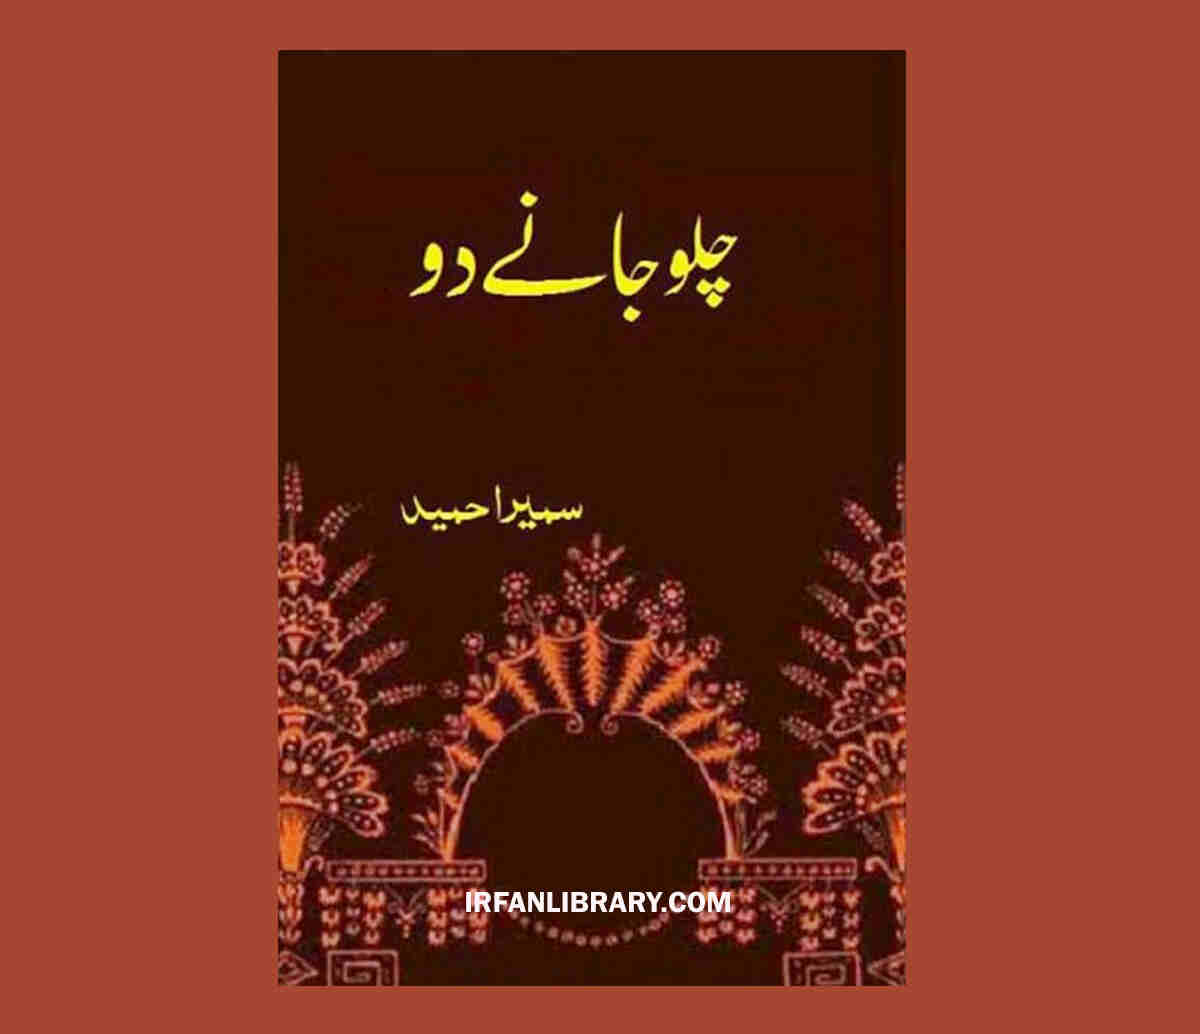 Chalo Jane Do by Sumaira Hameed